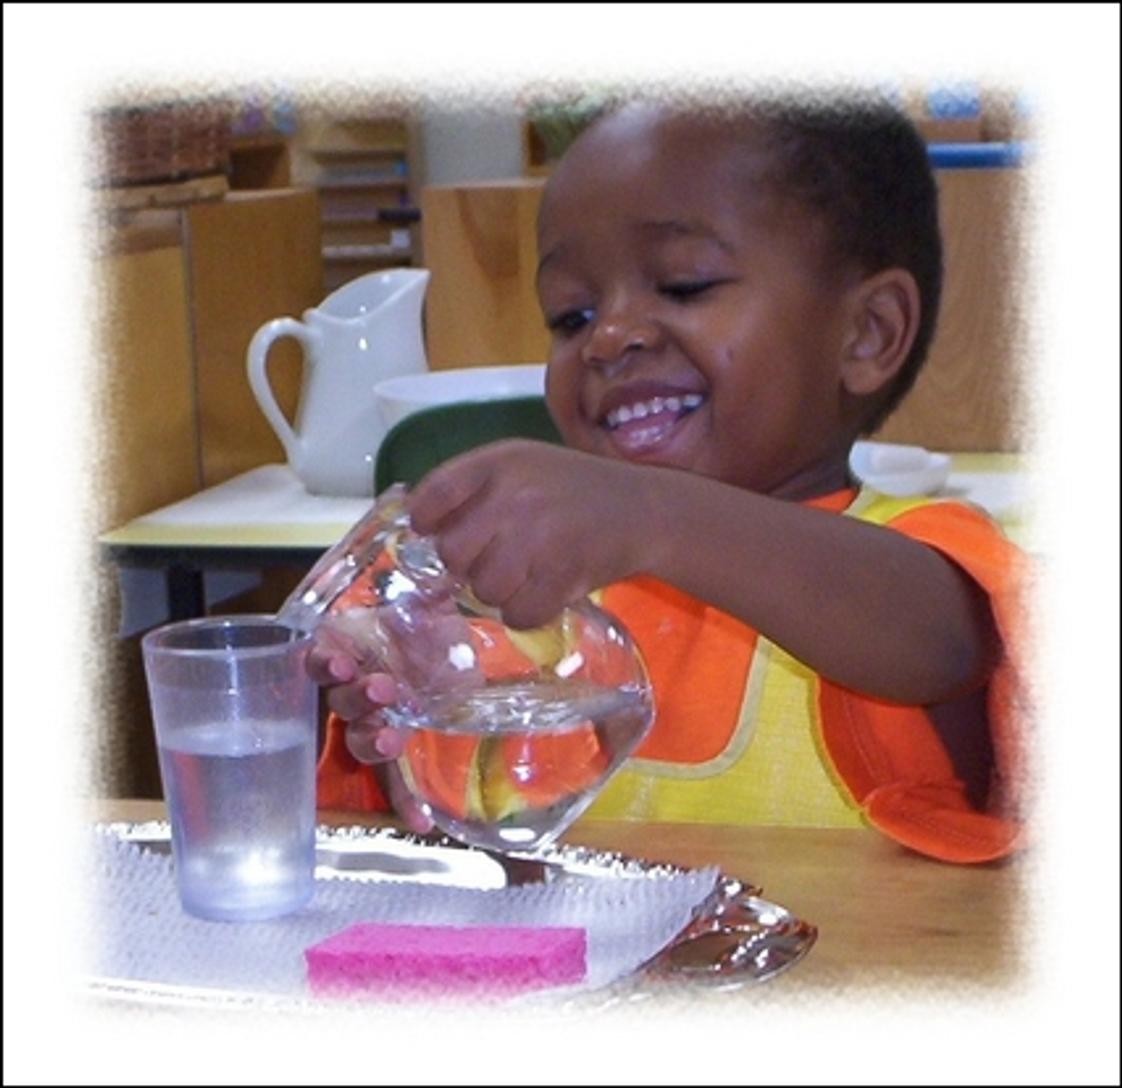 Oak Meadow Montessori Photo #1 - Children love the area of Practical Life in the Montessori classroom. This student is happily pouring water and learning fine muscle control and how to serve a beverage to his friends.